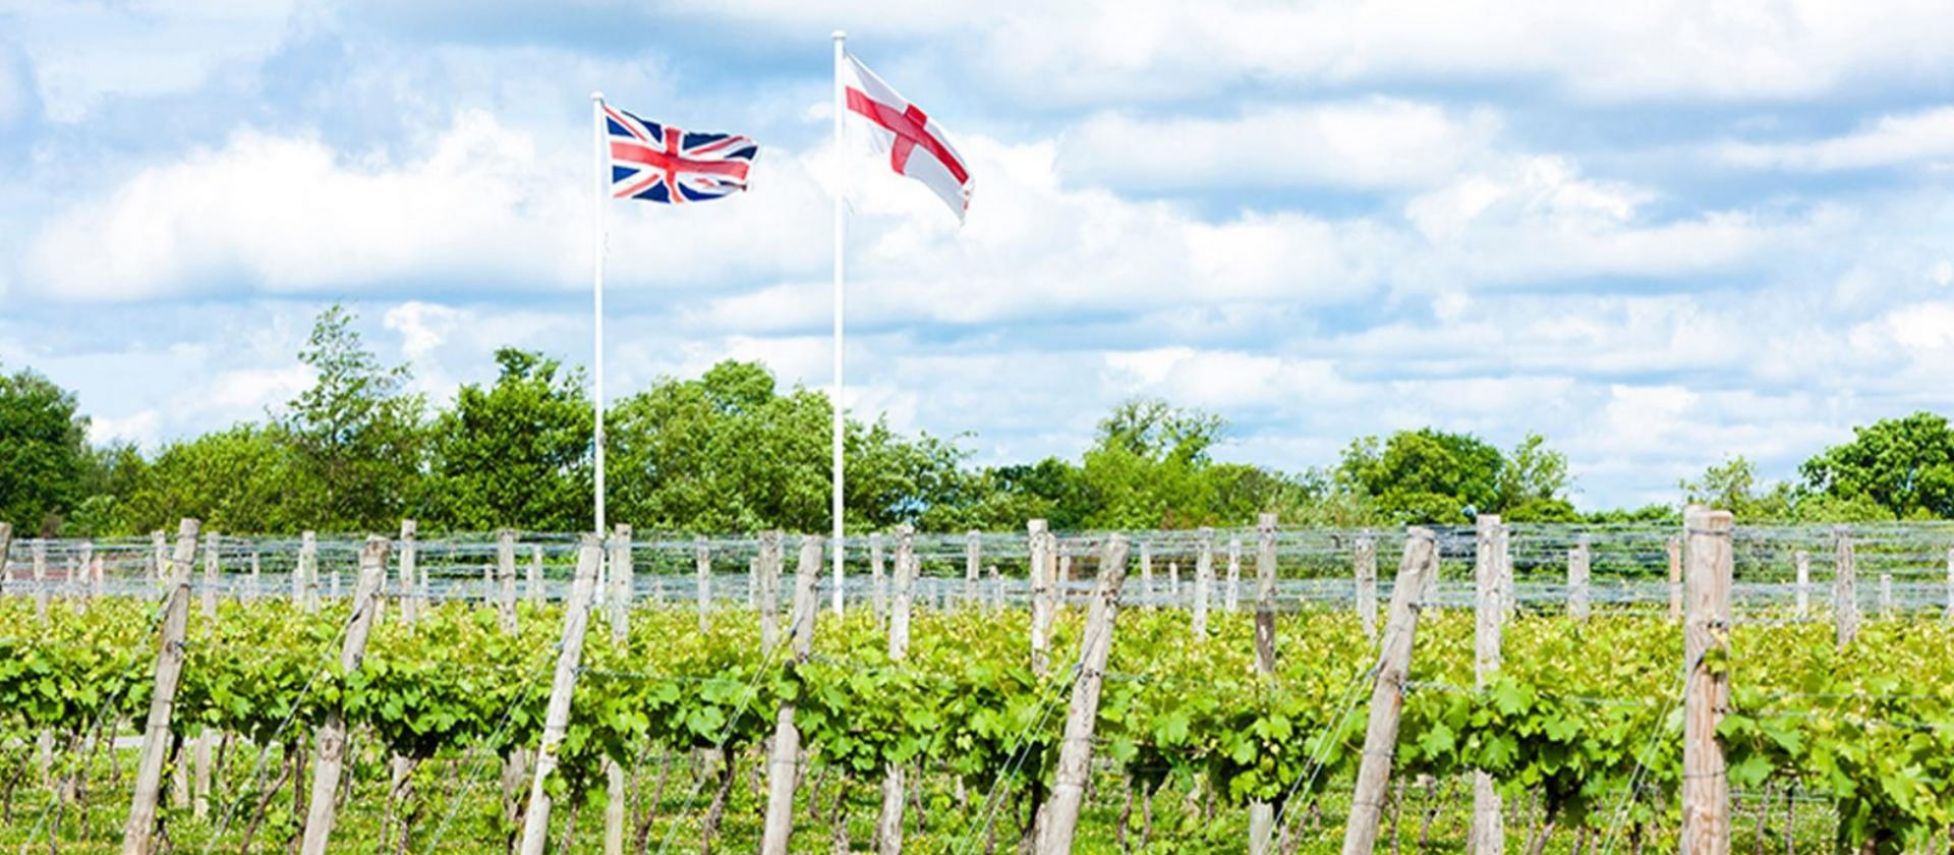 Photo for: The Pride of English Wines: History, Terroir, Varietals, and Vintages